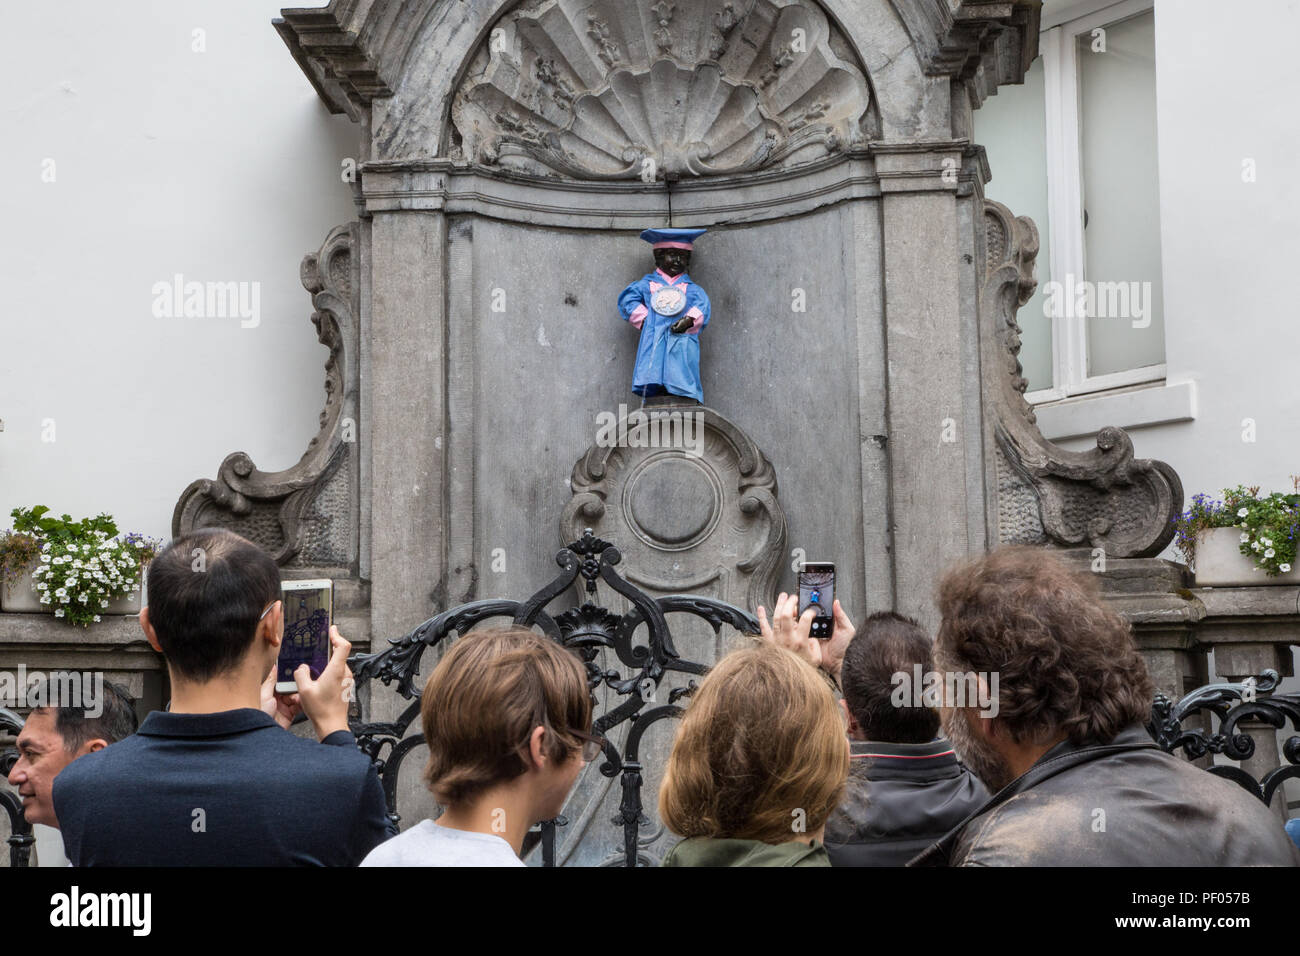 Brussels, Belgium. 18th August 2018 Manneken-Pis is the symbol of the Brussels folklore,during certain events he receives a special costume this costume is from the Pink Elephant Brotherhood a beer promotion company he will be dressed from 9am to 6pm 18th August 2018 Credit: steven roe/Alamy Live News Stock Photo